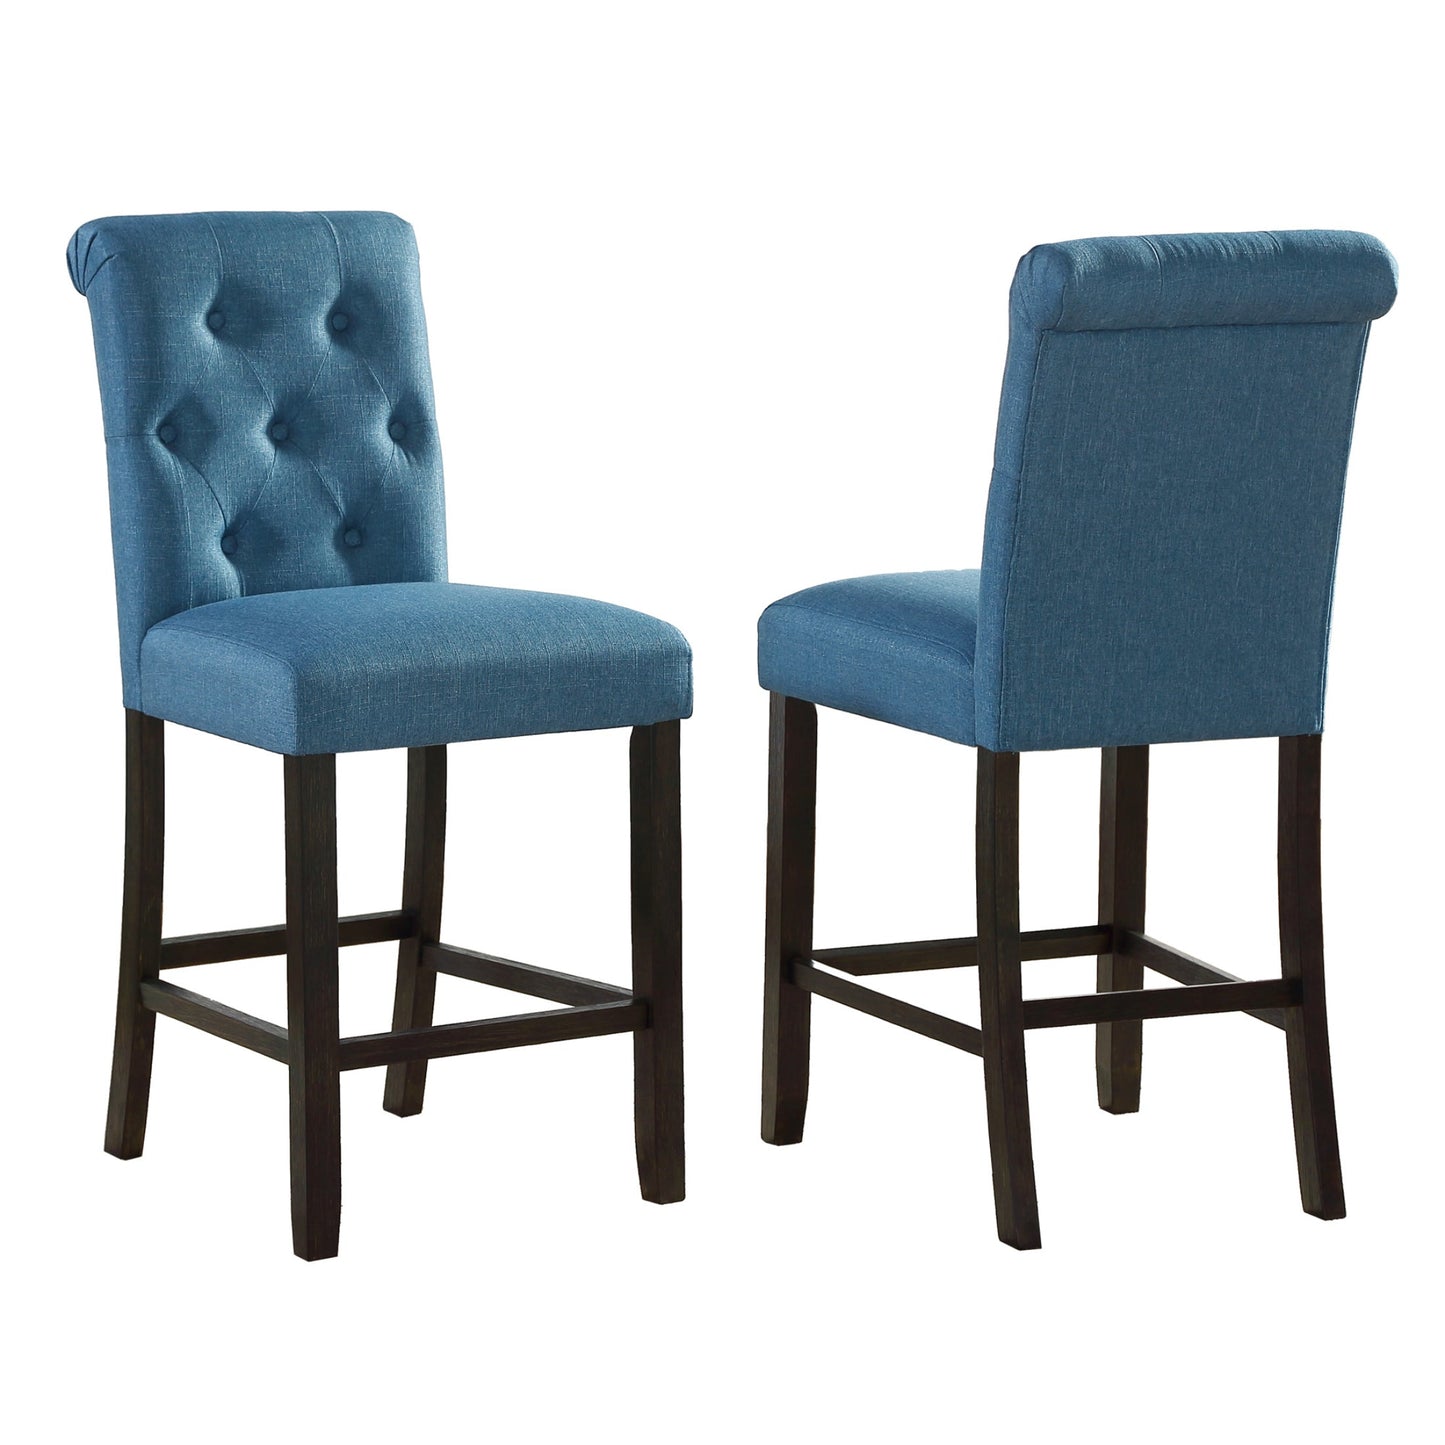 Leviton Solid Wood Tufted Asons Counter Height Stool, Set of 2, Blue